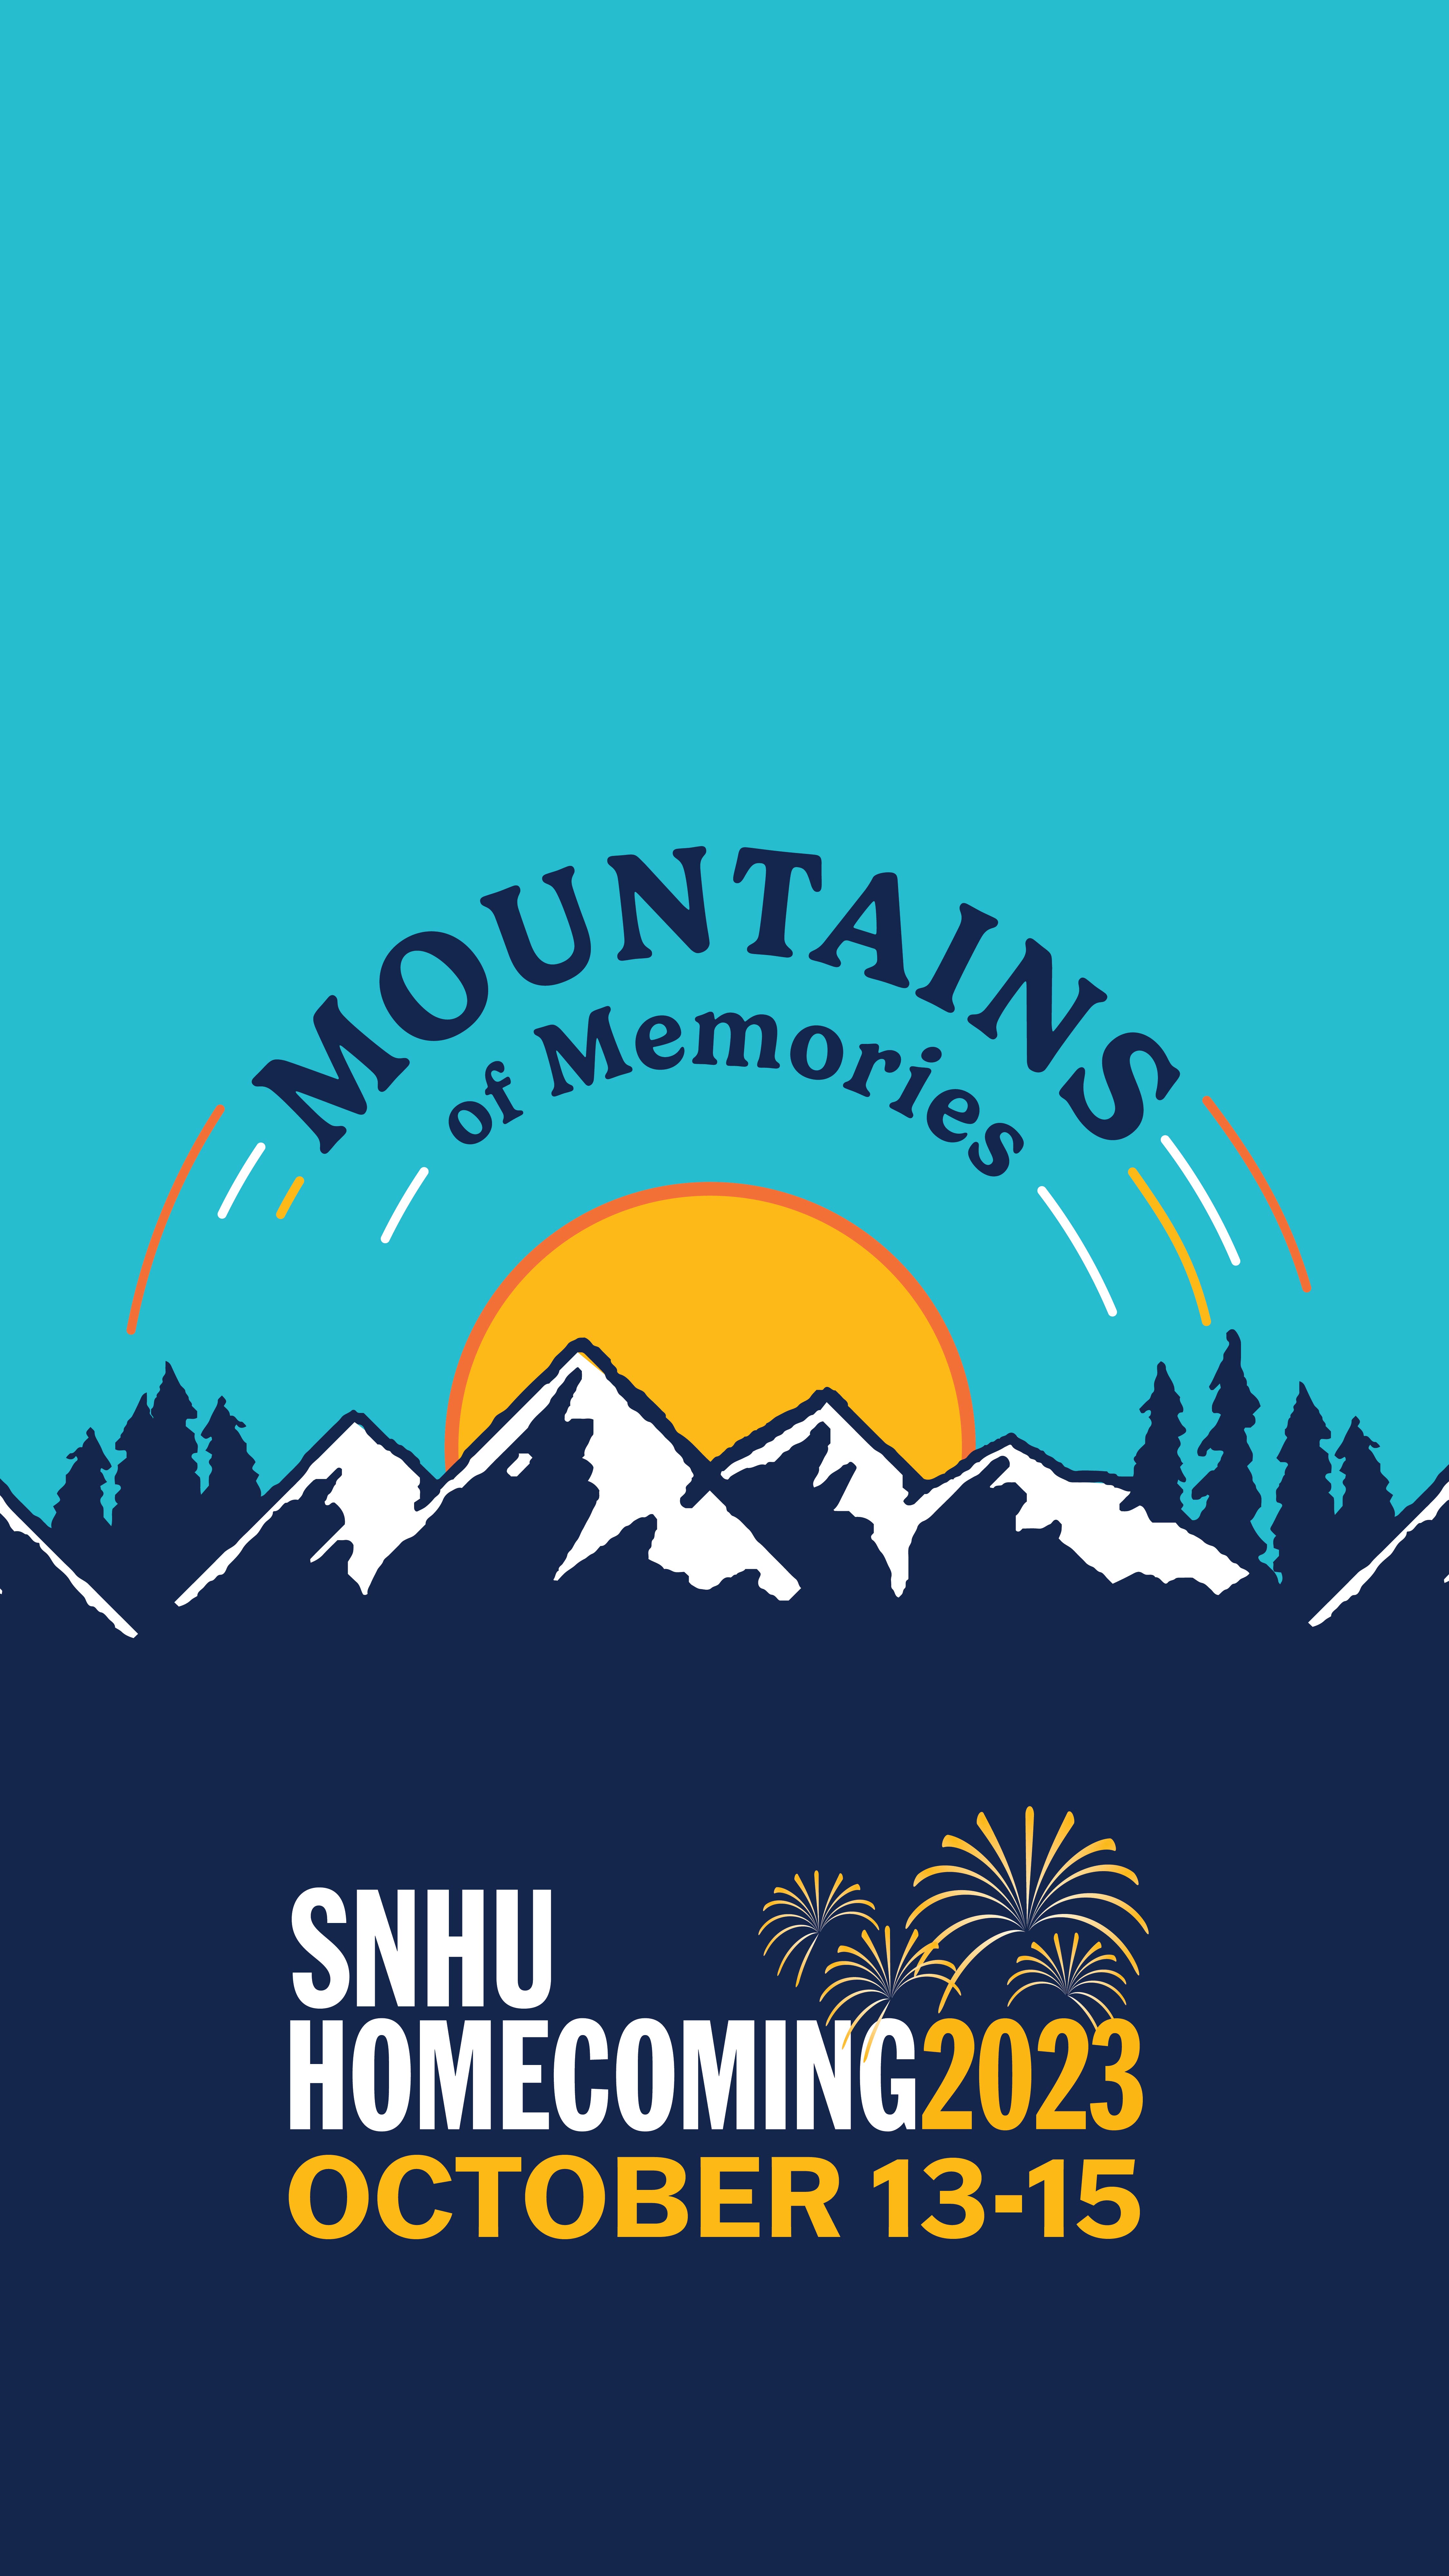 Sun setting over mountainous horizon with text over sun saying "Mountains of Memories". Mountain silhouette reads "SNHU Homecoming 2023" with fireworks over 2023.